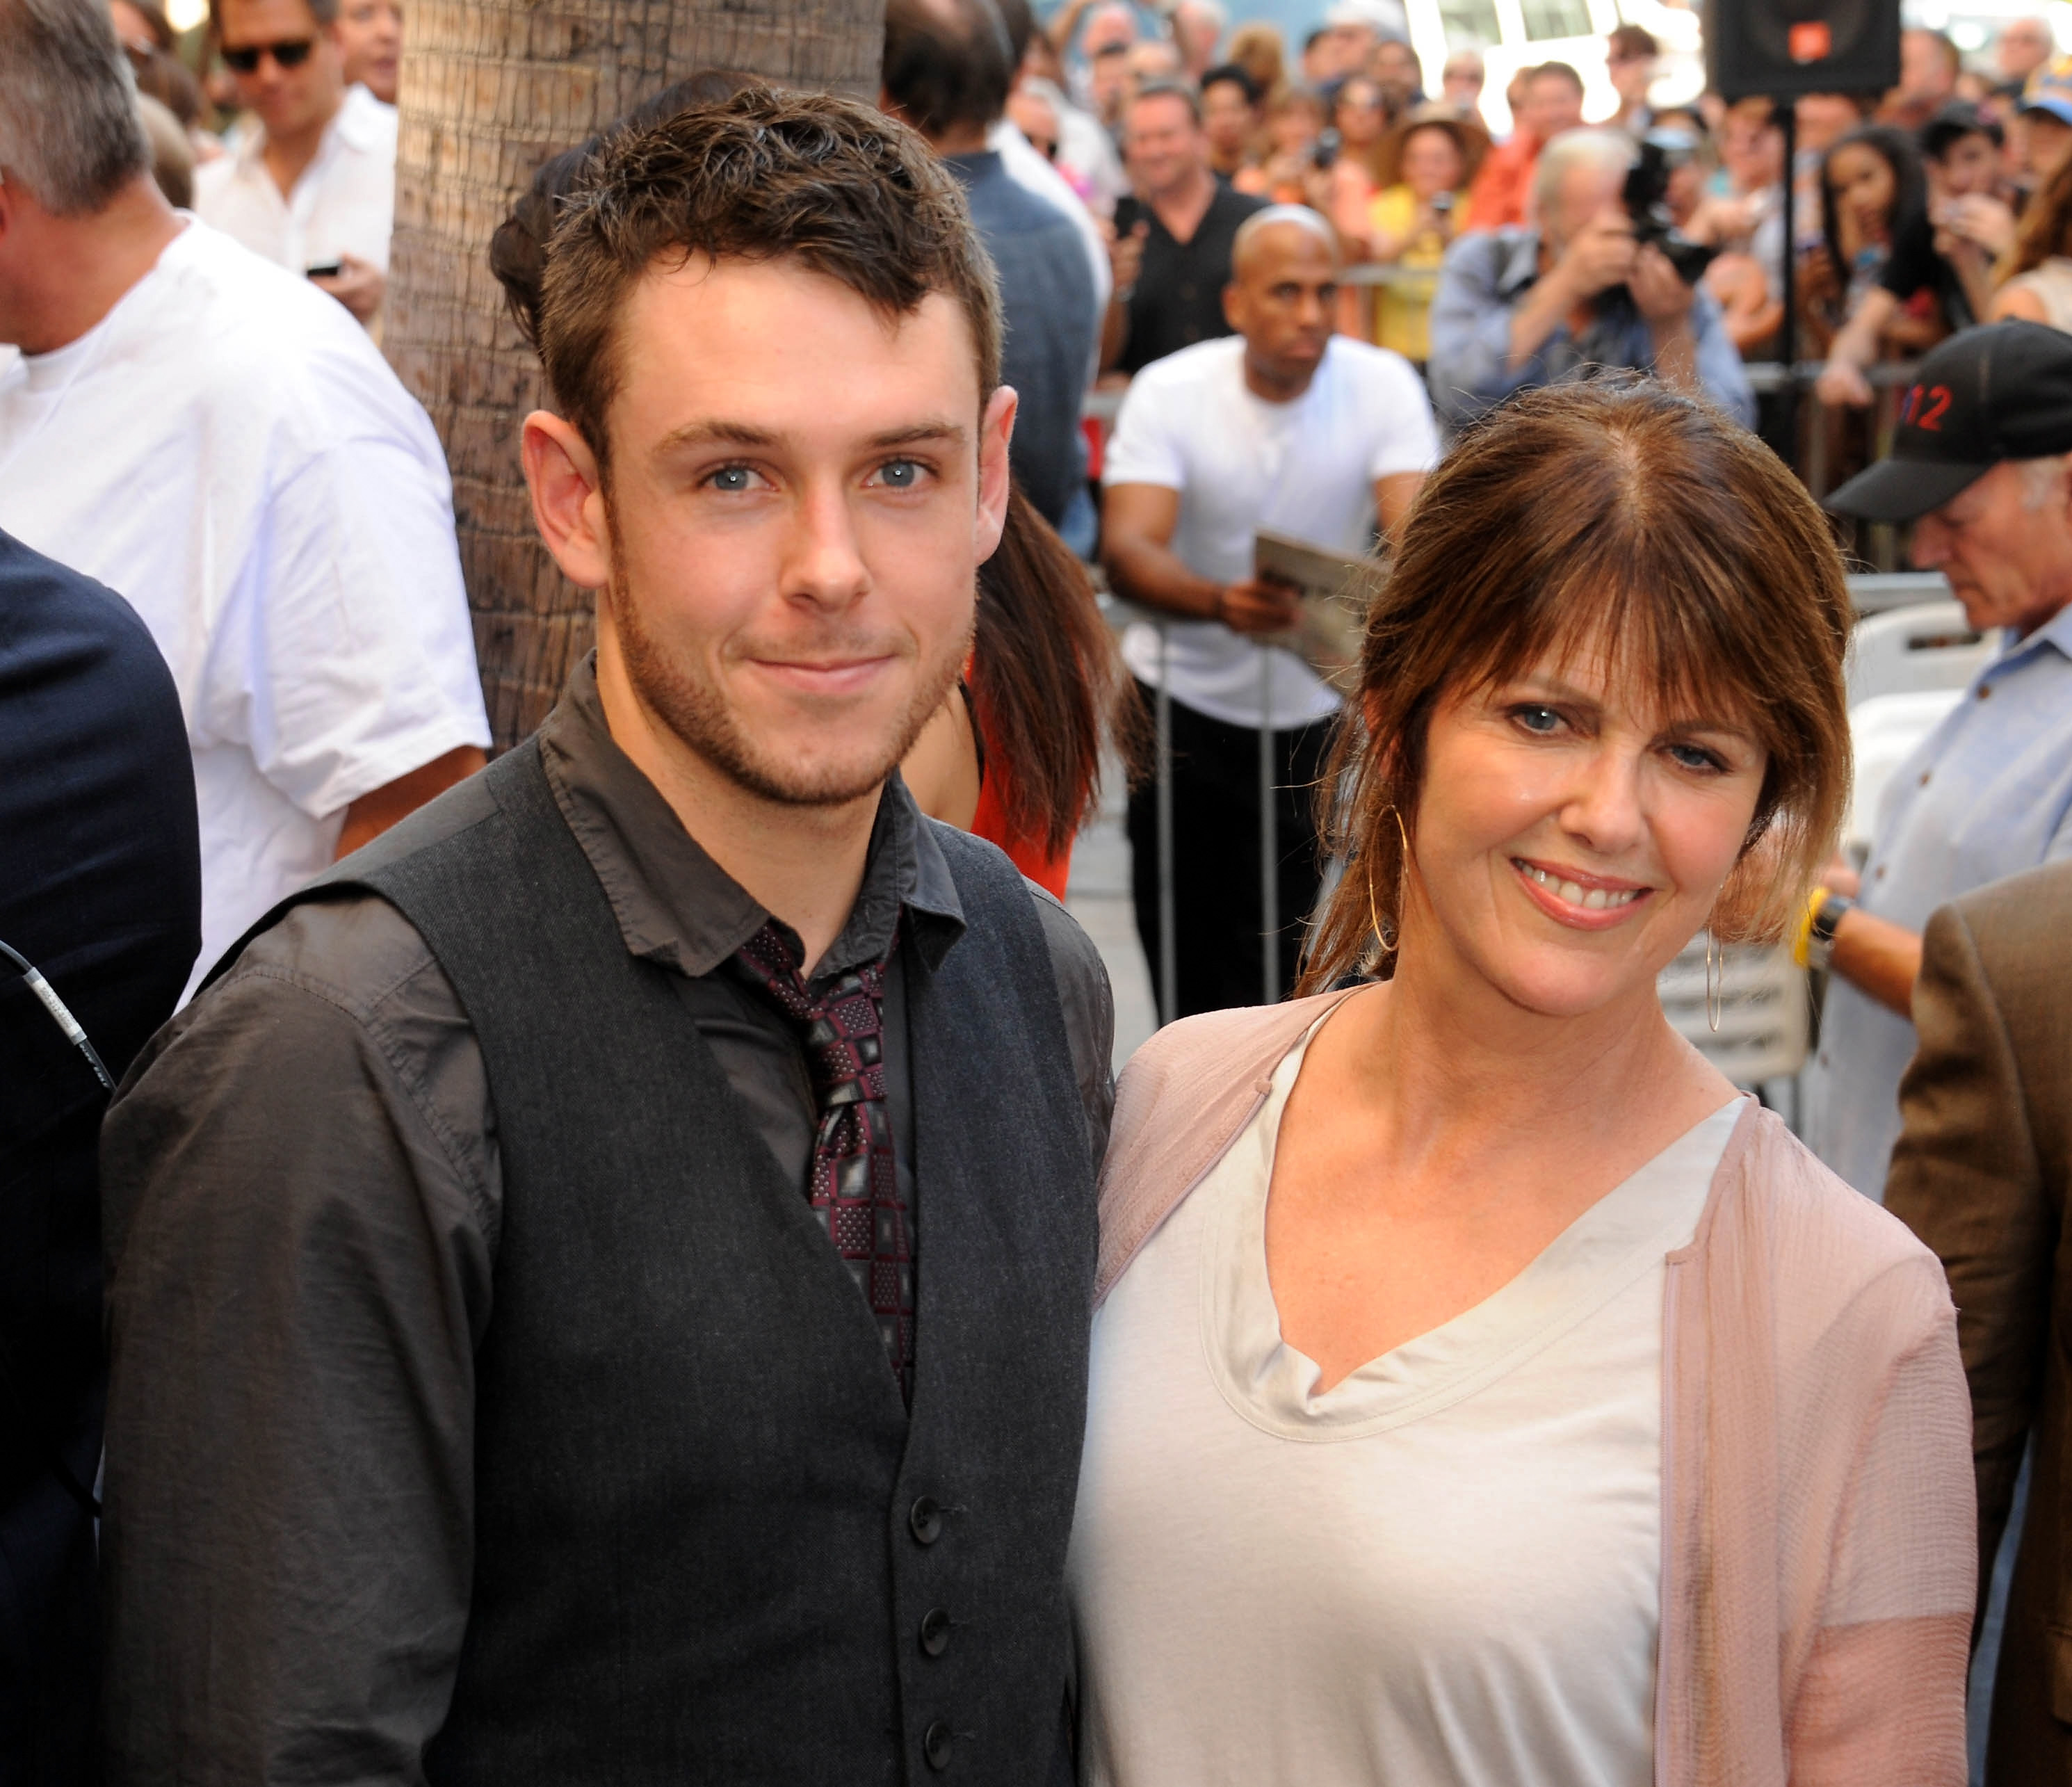 Sean Harmon and Pam Dawber at Mark Harmon's Hollywood Walk of Fame star ceremony in Hollywood, 2012 | Source: Getty Images